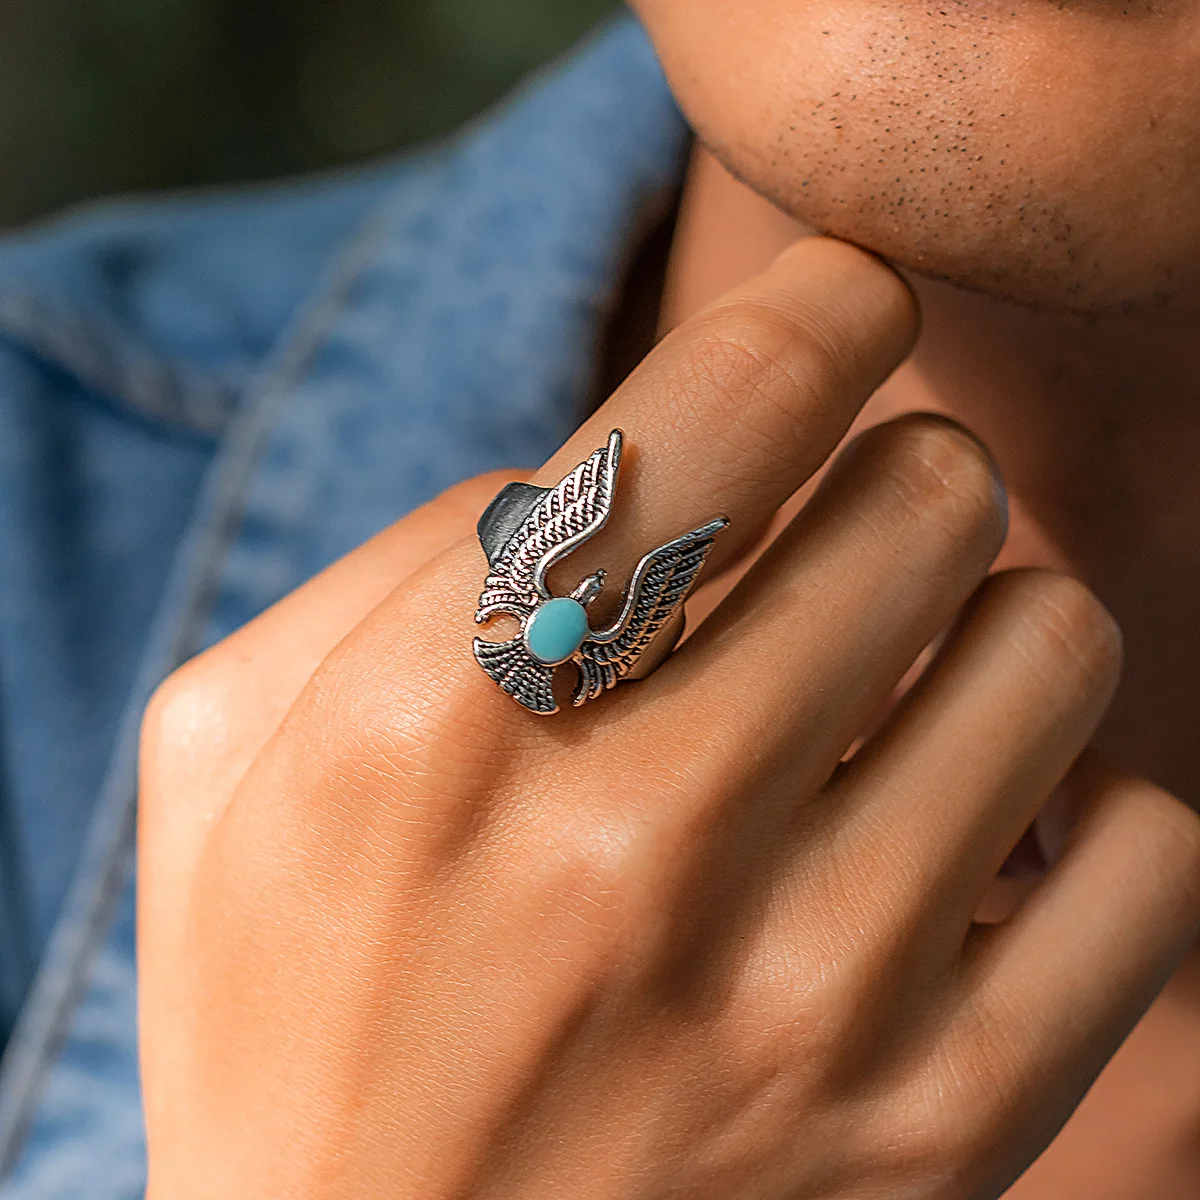 

Turquoise Winged Eagle Ring for Men Vintage Index Finger Ring, High-end Sense Ring, Vintage Men's Jewelry Free Shipping